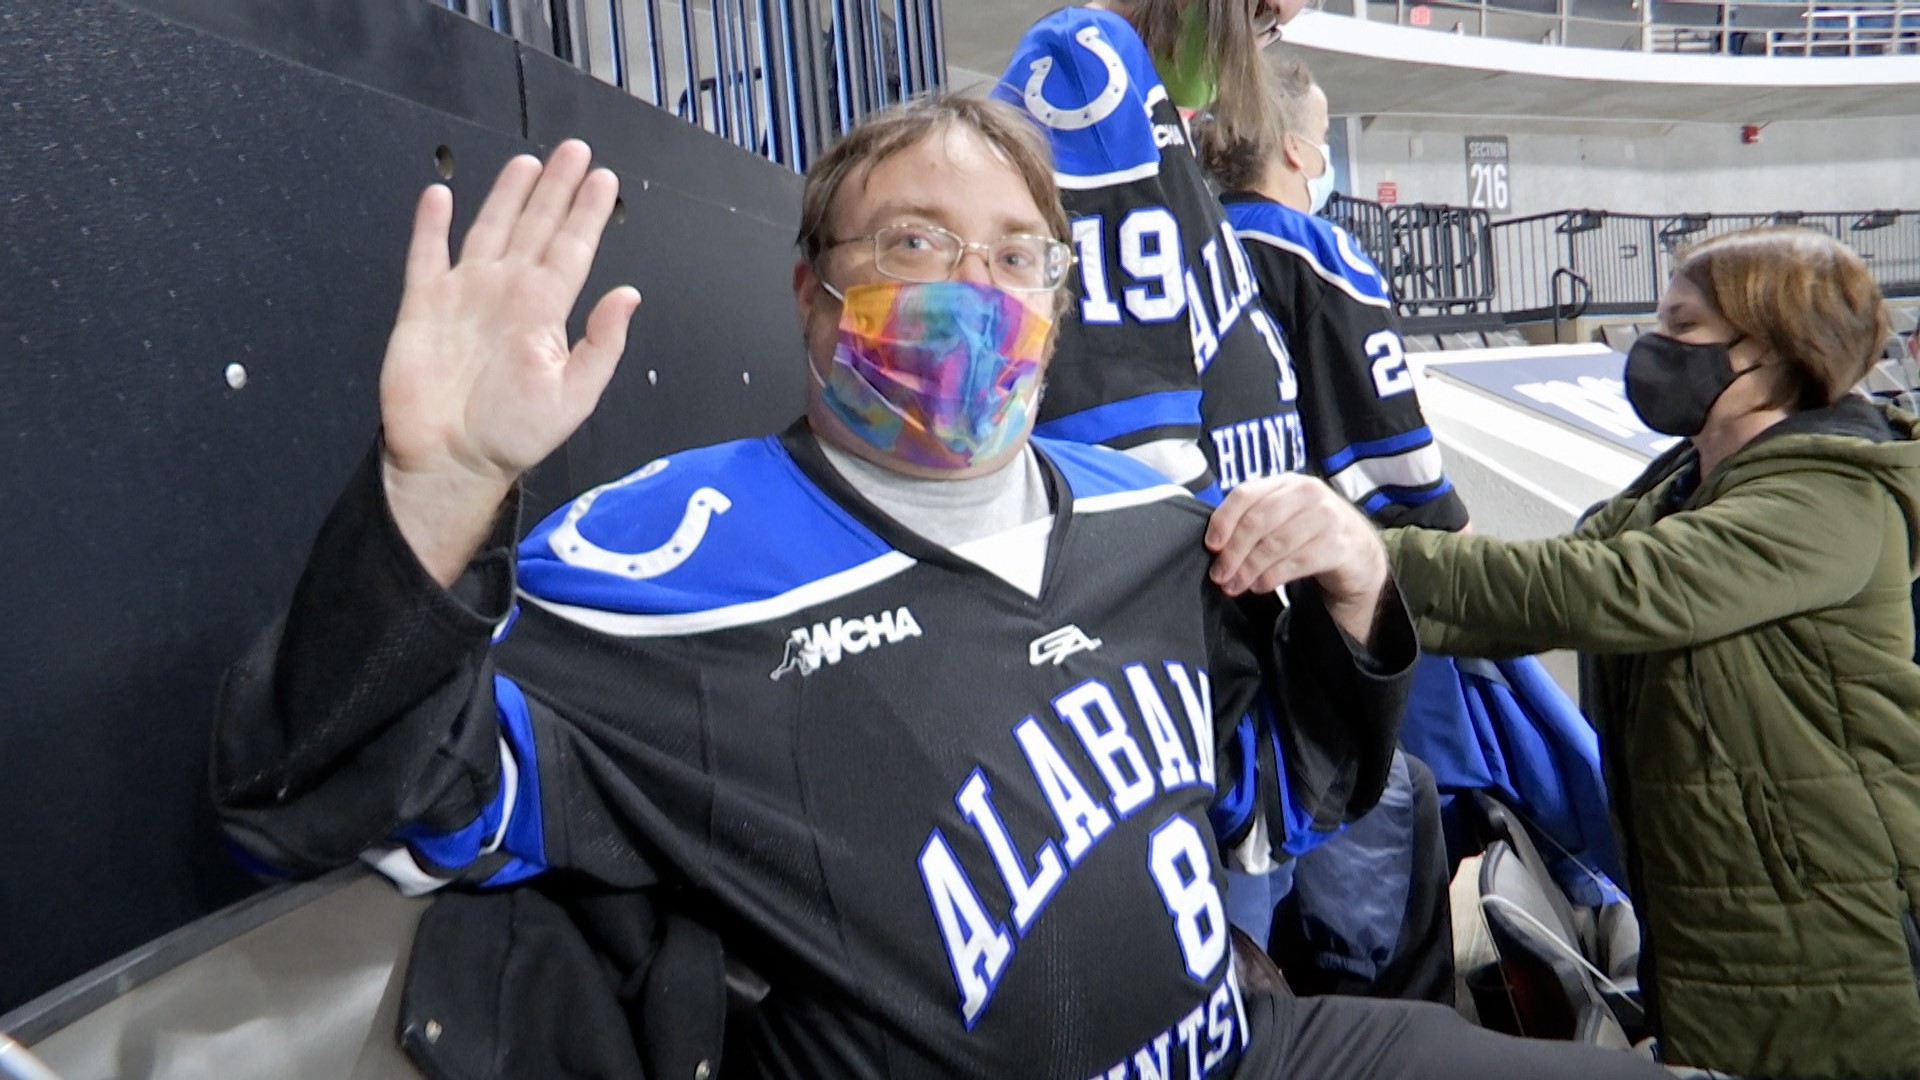 Residents at 305 8th Street, a group home for adults with special needs, were surprised with UAH Men's Hockey season tickets.